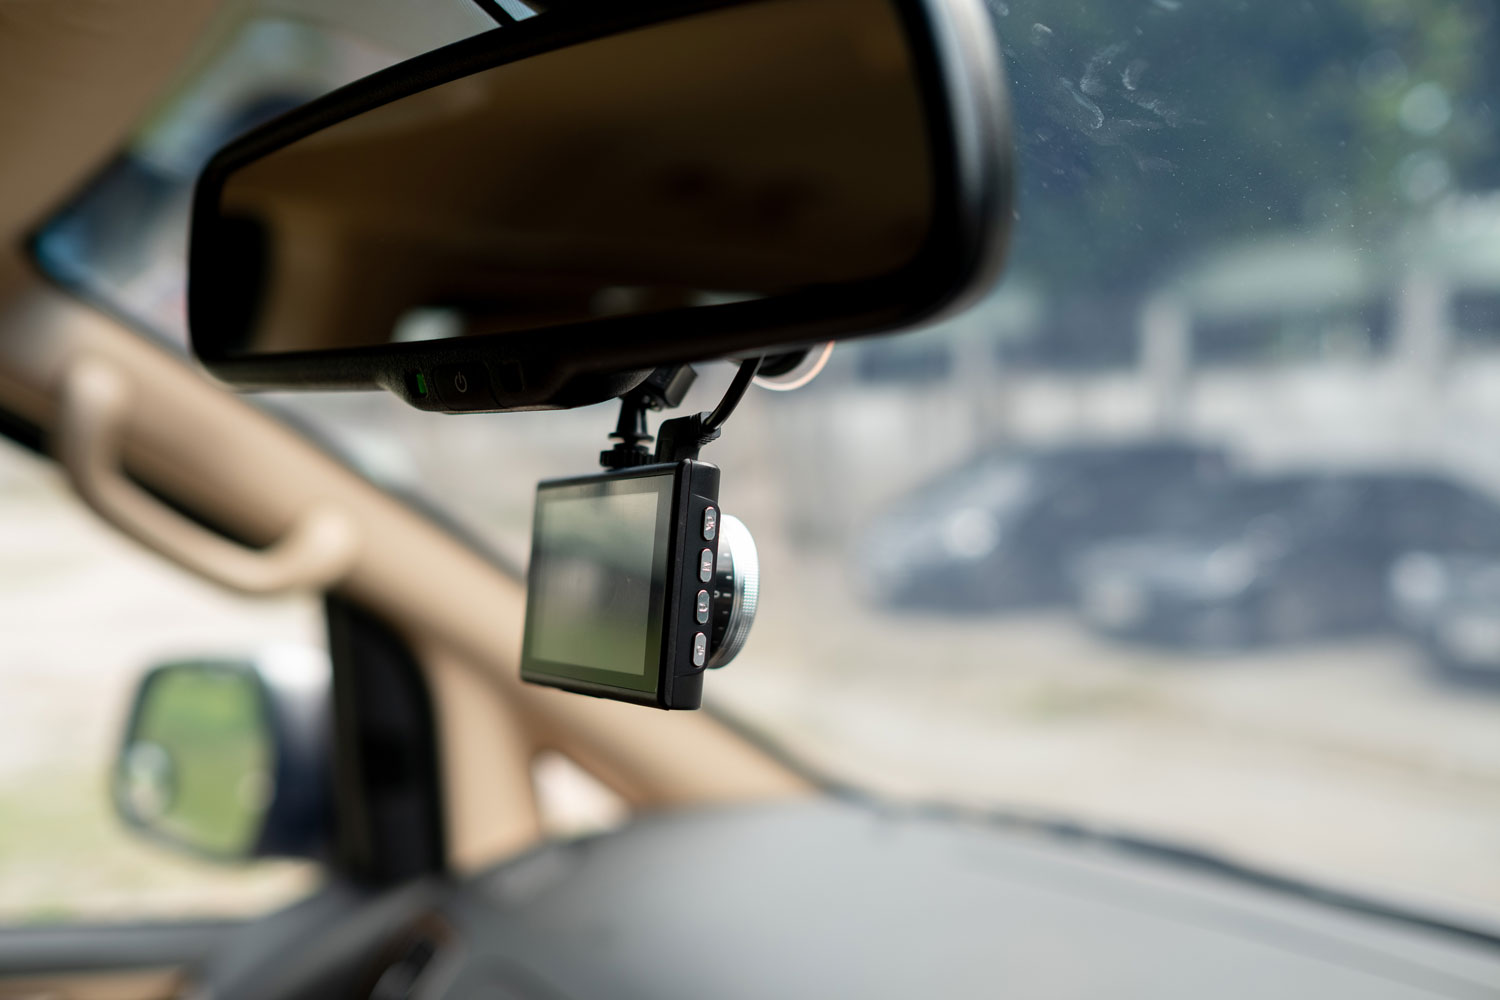 A dashcam installed in the rear view mirror